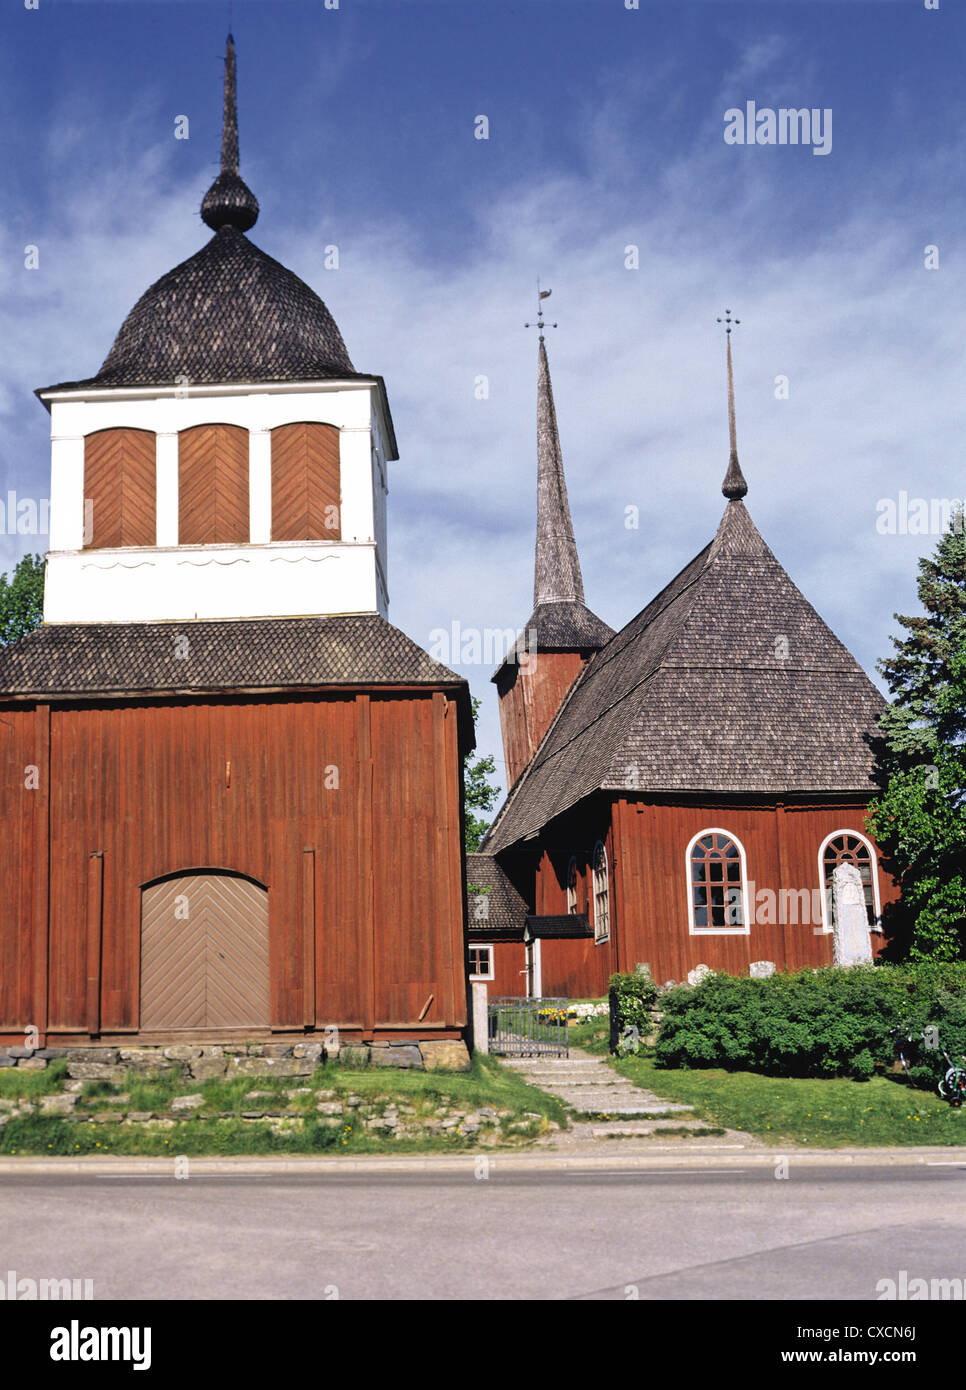 Ulrica Eleonora Church (completed in 1700) in Kristinestad, Finland Stock Photo